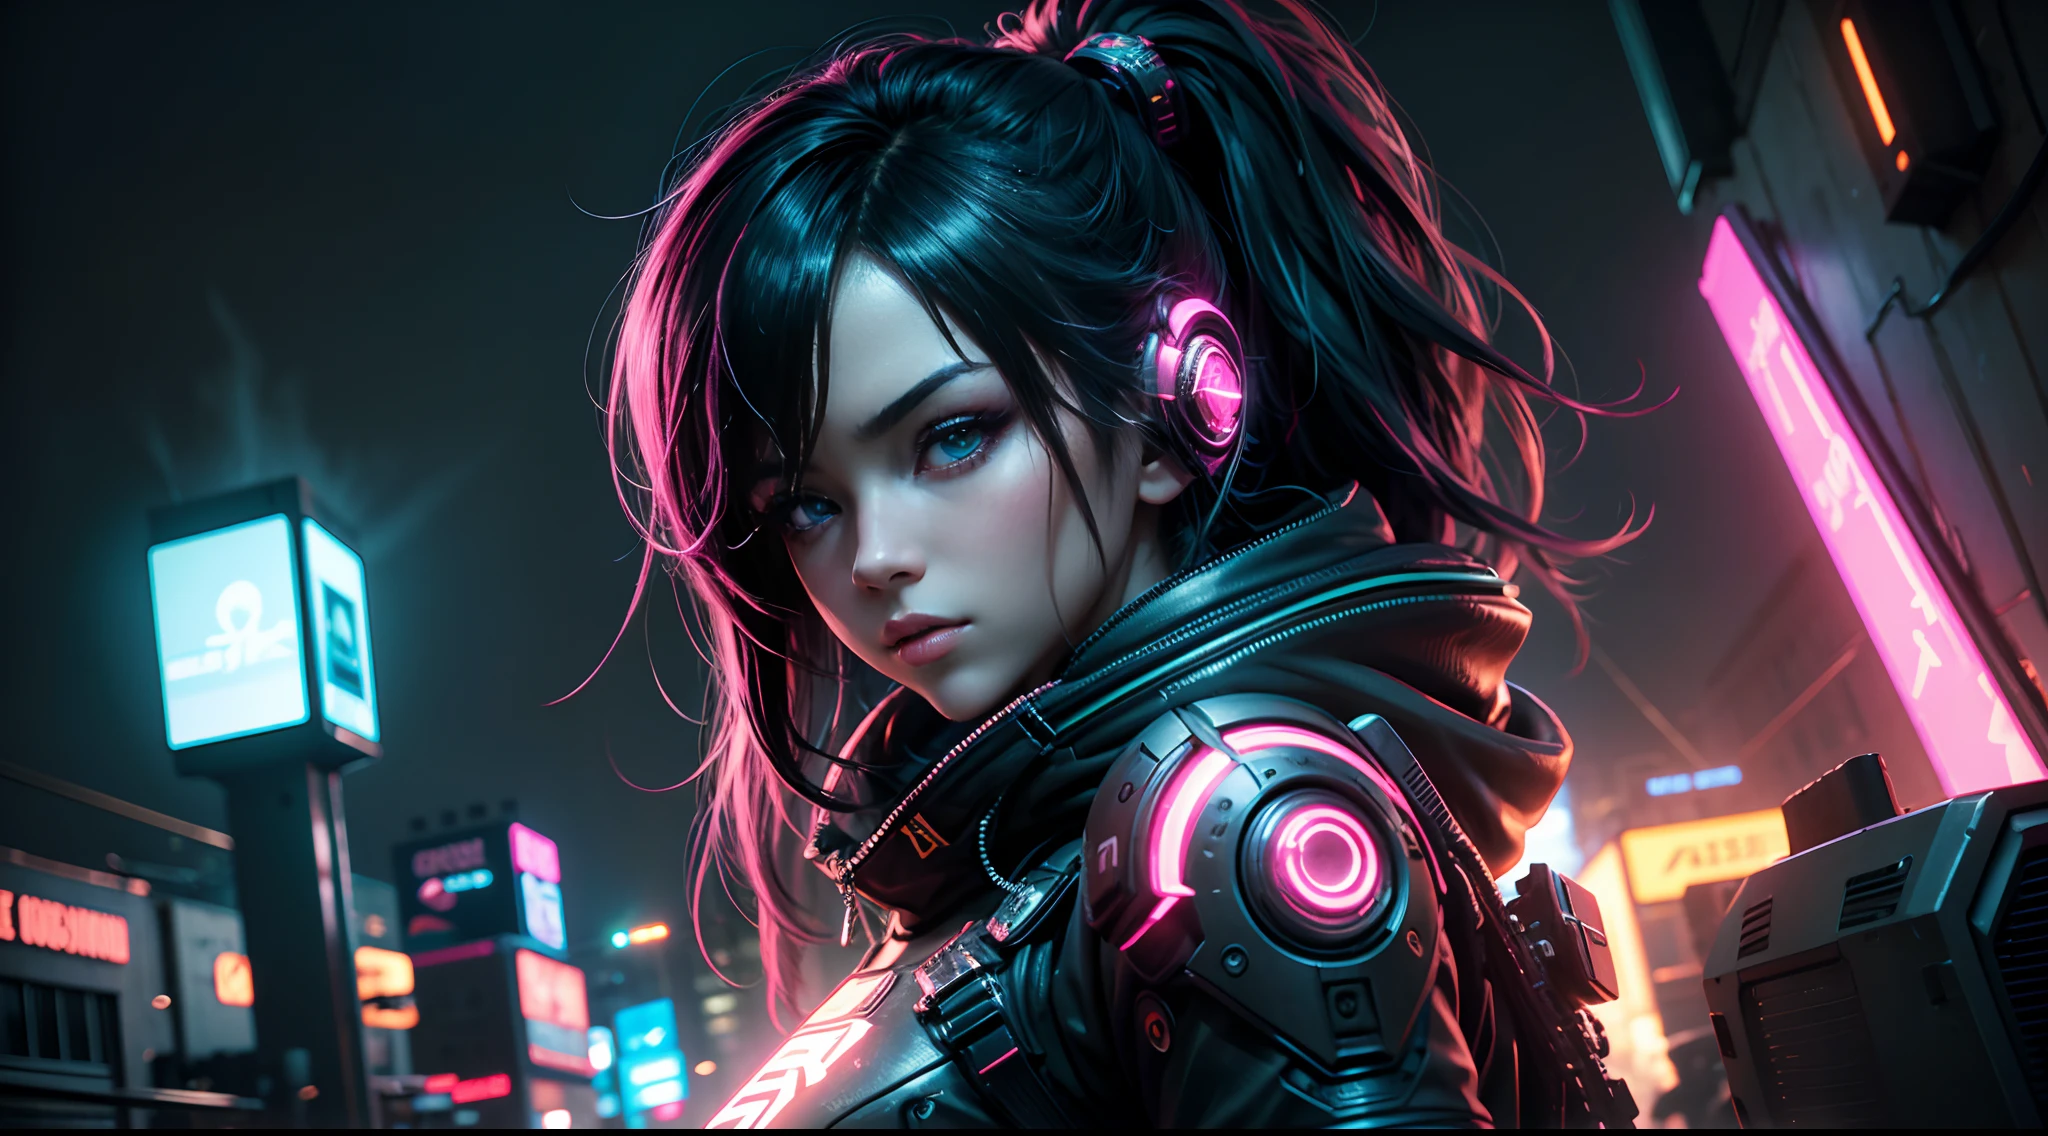 An ultra-realistic female anime character amidst a neon-drenched cityscape at night. The digital artwork showcases exquisite detailing, from her expressive eyes to her cyberpunk attire. A masterpiece in 8K resolution, immersing viewers in a captivating cyberpunk anime experience. Photo taken by Hiroshi Sugimoto with a Nikon D850 and a 50mm lens, Studio lighting, Neon ambiance. 8K, Ultra-HD, Super-Resolution. --v 5 --q 2